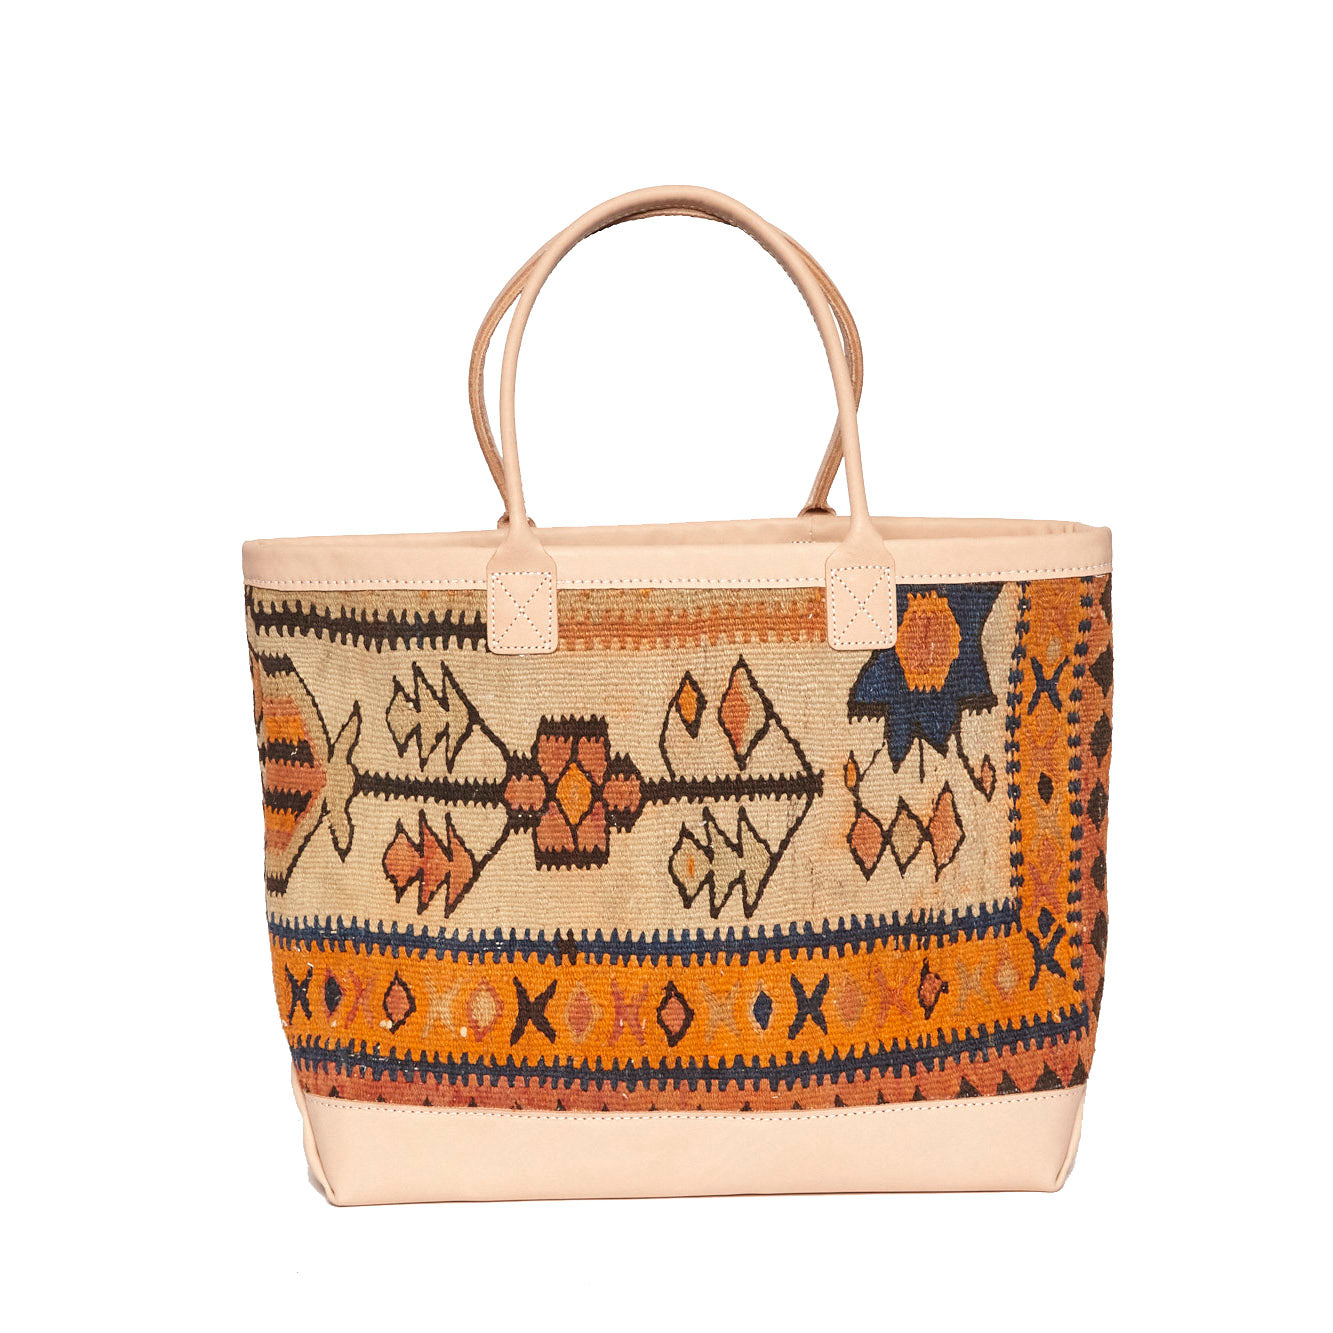 One of a kind King Kennedy Rug tote with orange, cream, blue floral flatweave pattern. With pale beige leather handle and boot. Perfect for running around the city all day or a jaunt to the farmers market